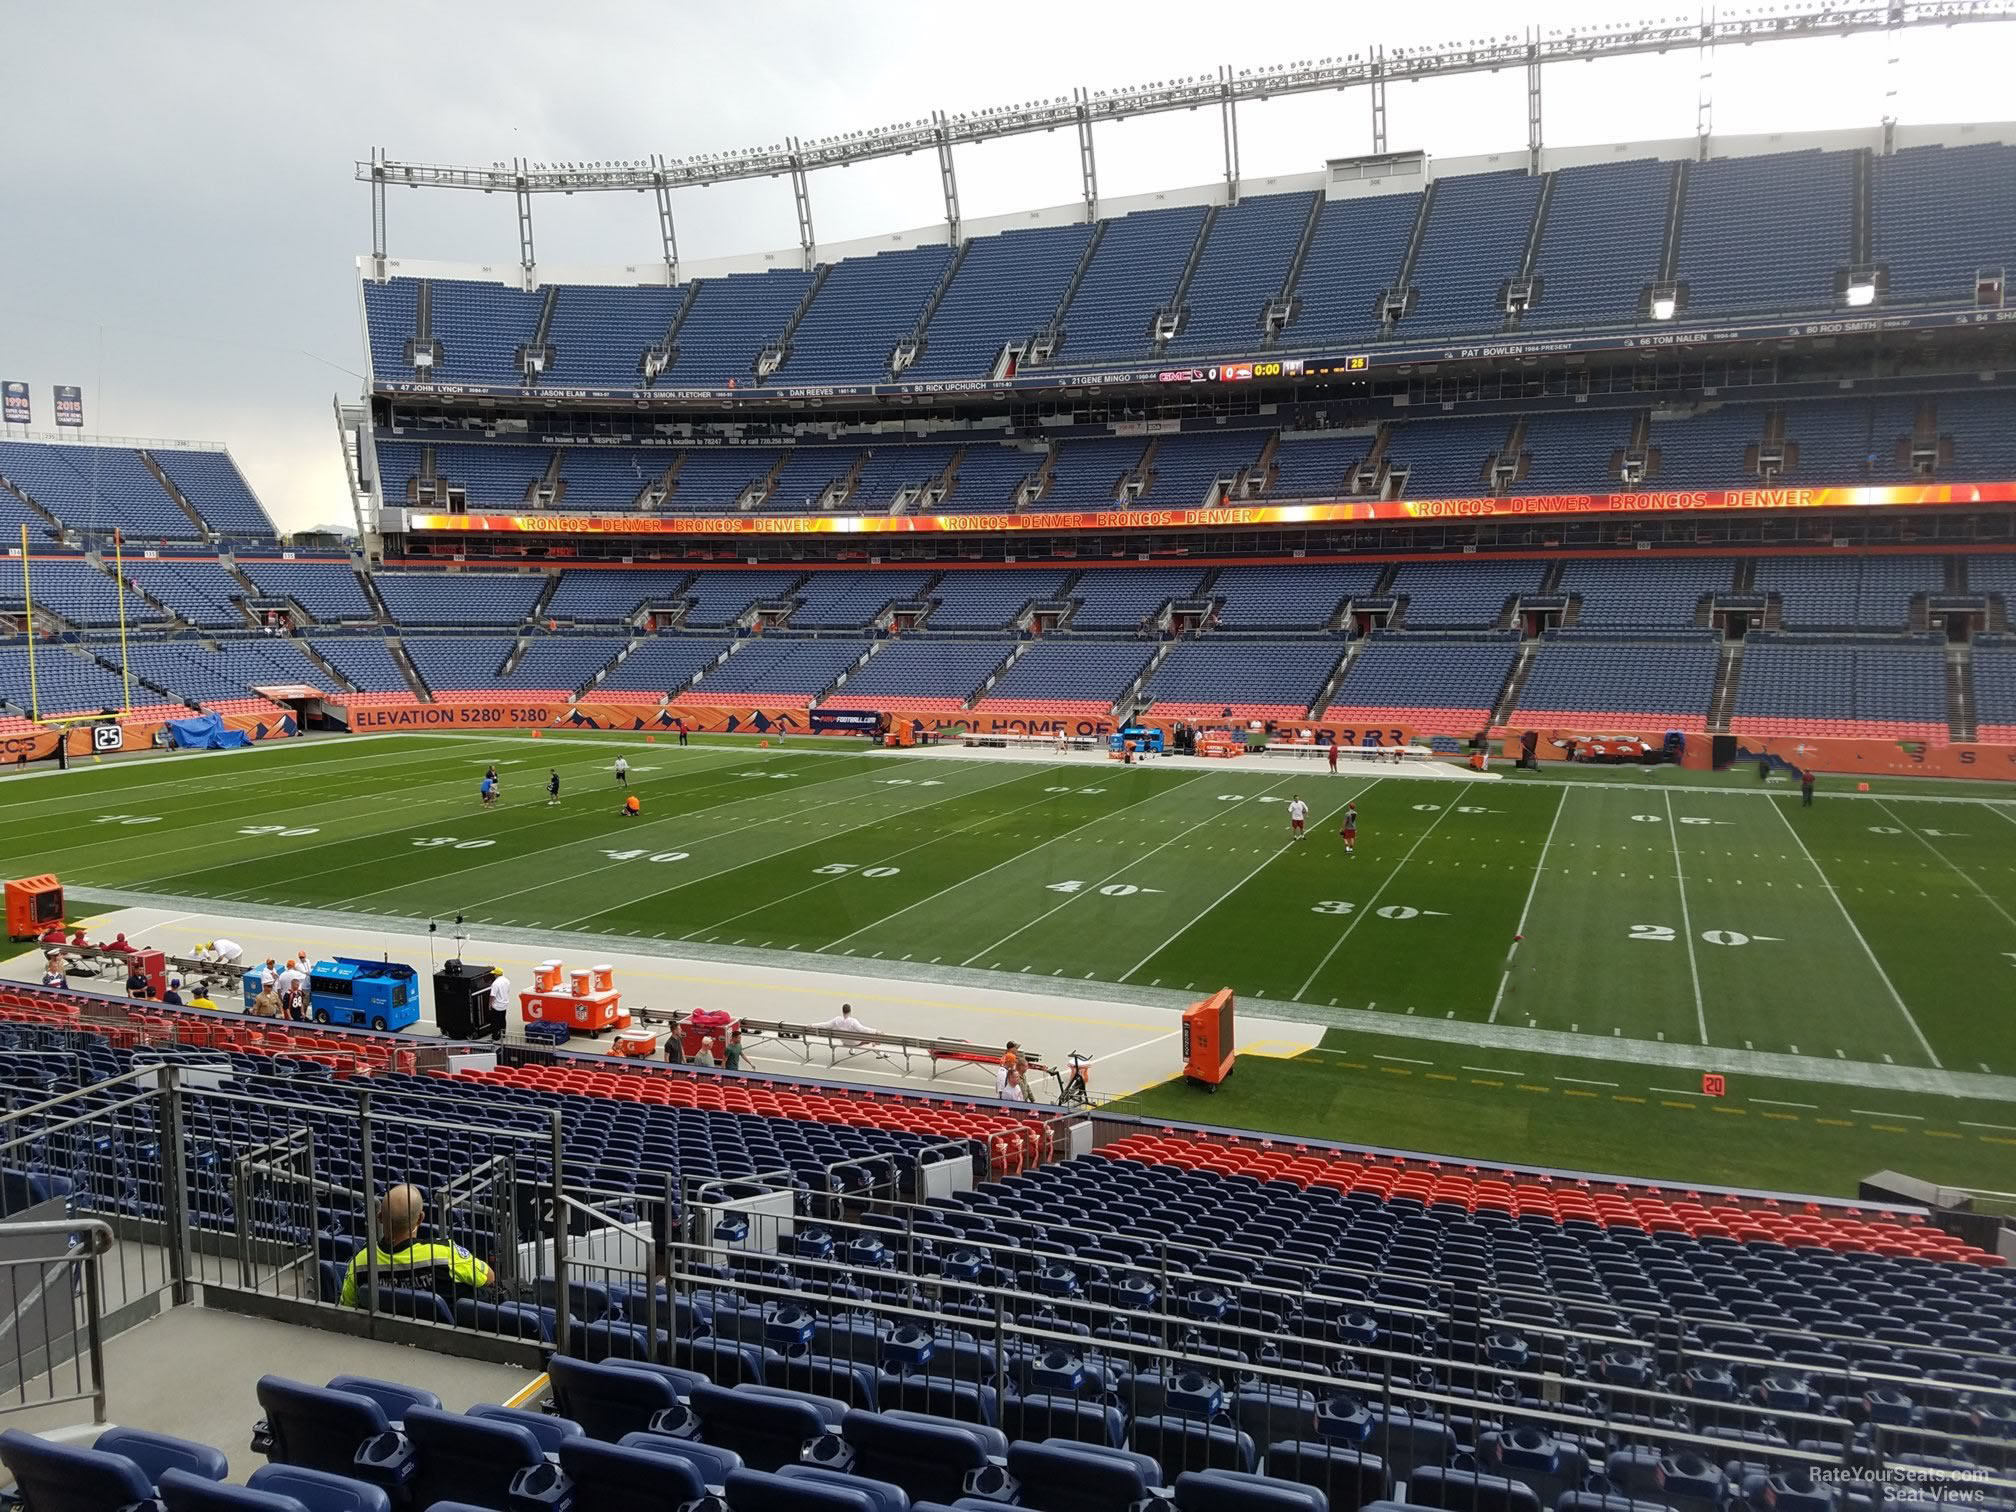 section 121, row 30 seat view  - empower field (at mile high)